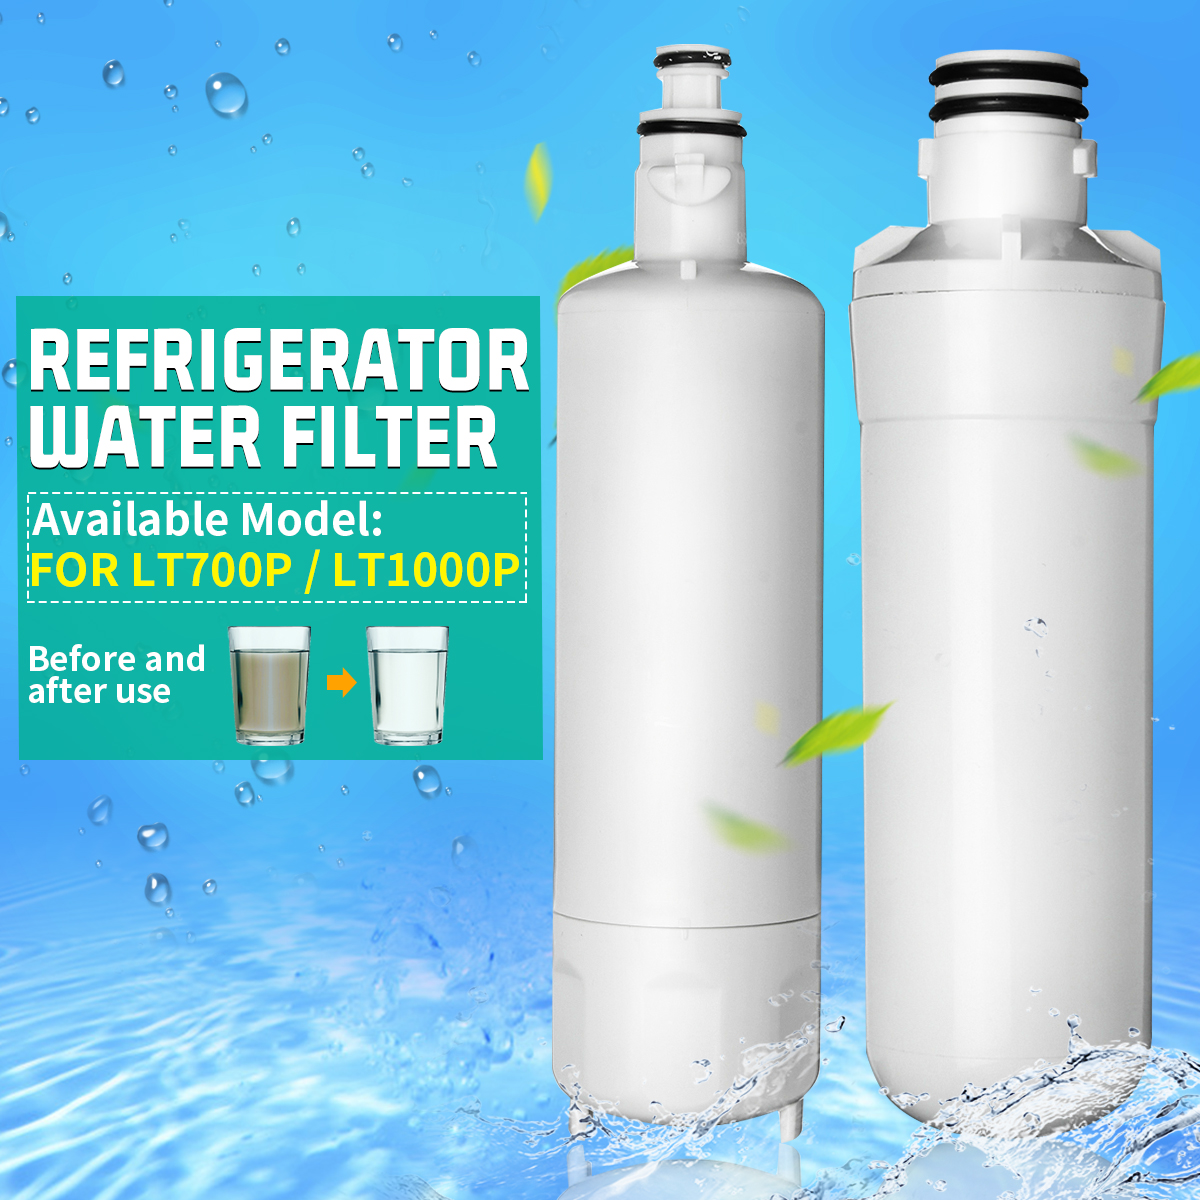 Refrigerator-Water-Filter-Replacement-Cartridge-for--LG-LT700P-LT1000P-1540596-2